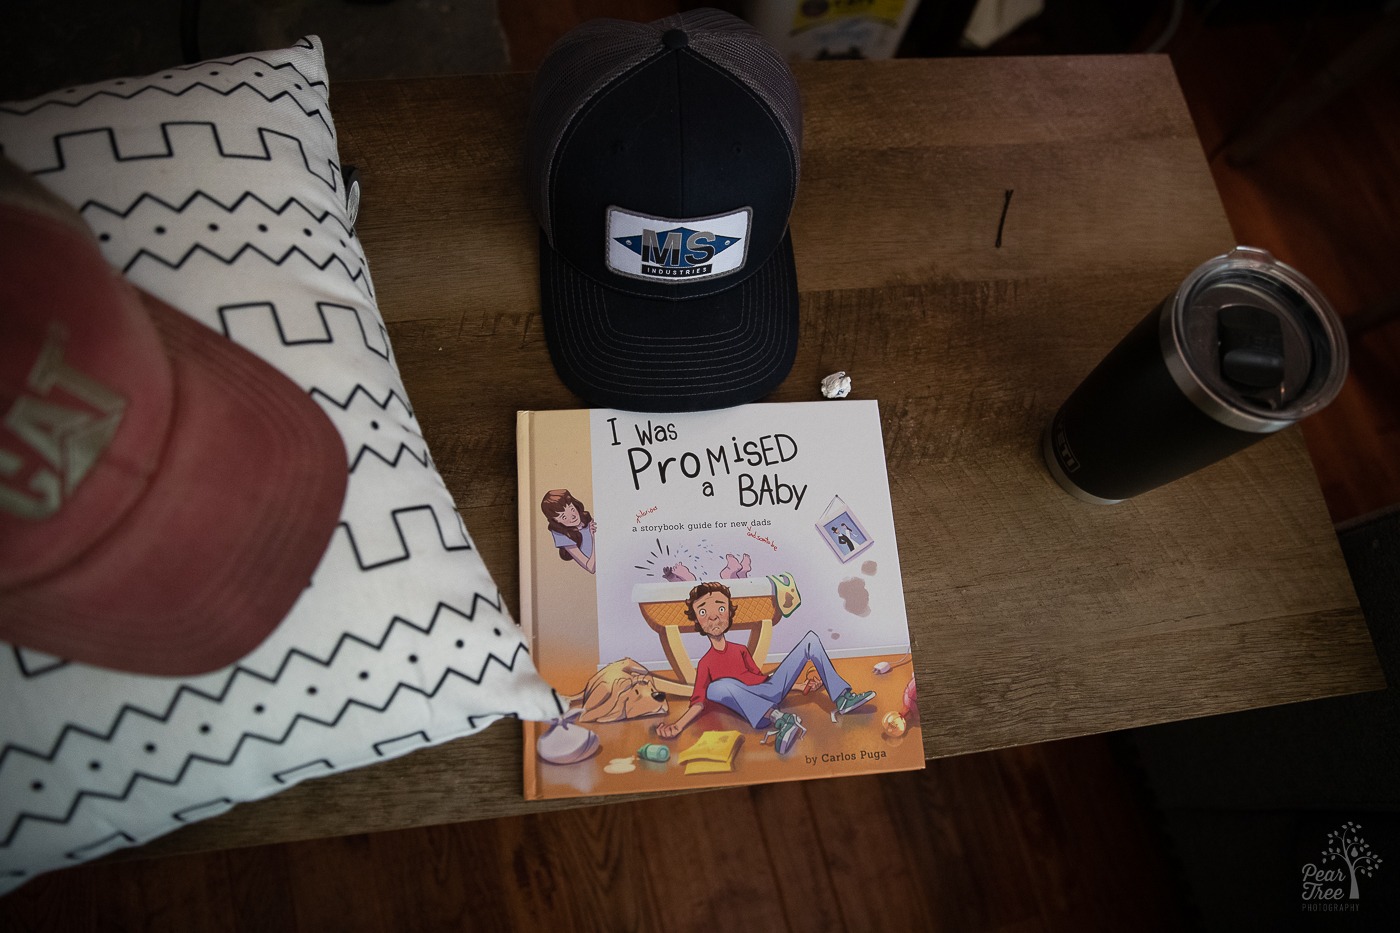 The book "I WAS PROMISED A BABY" sitting on a coffee table next to two hats and a coffee mug